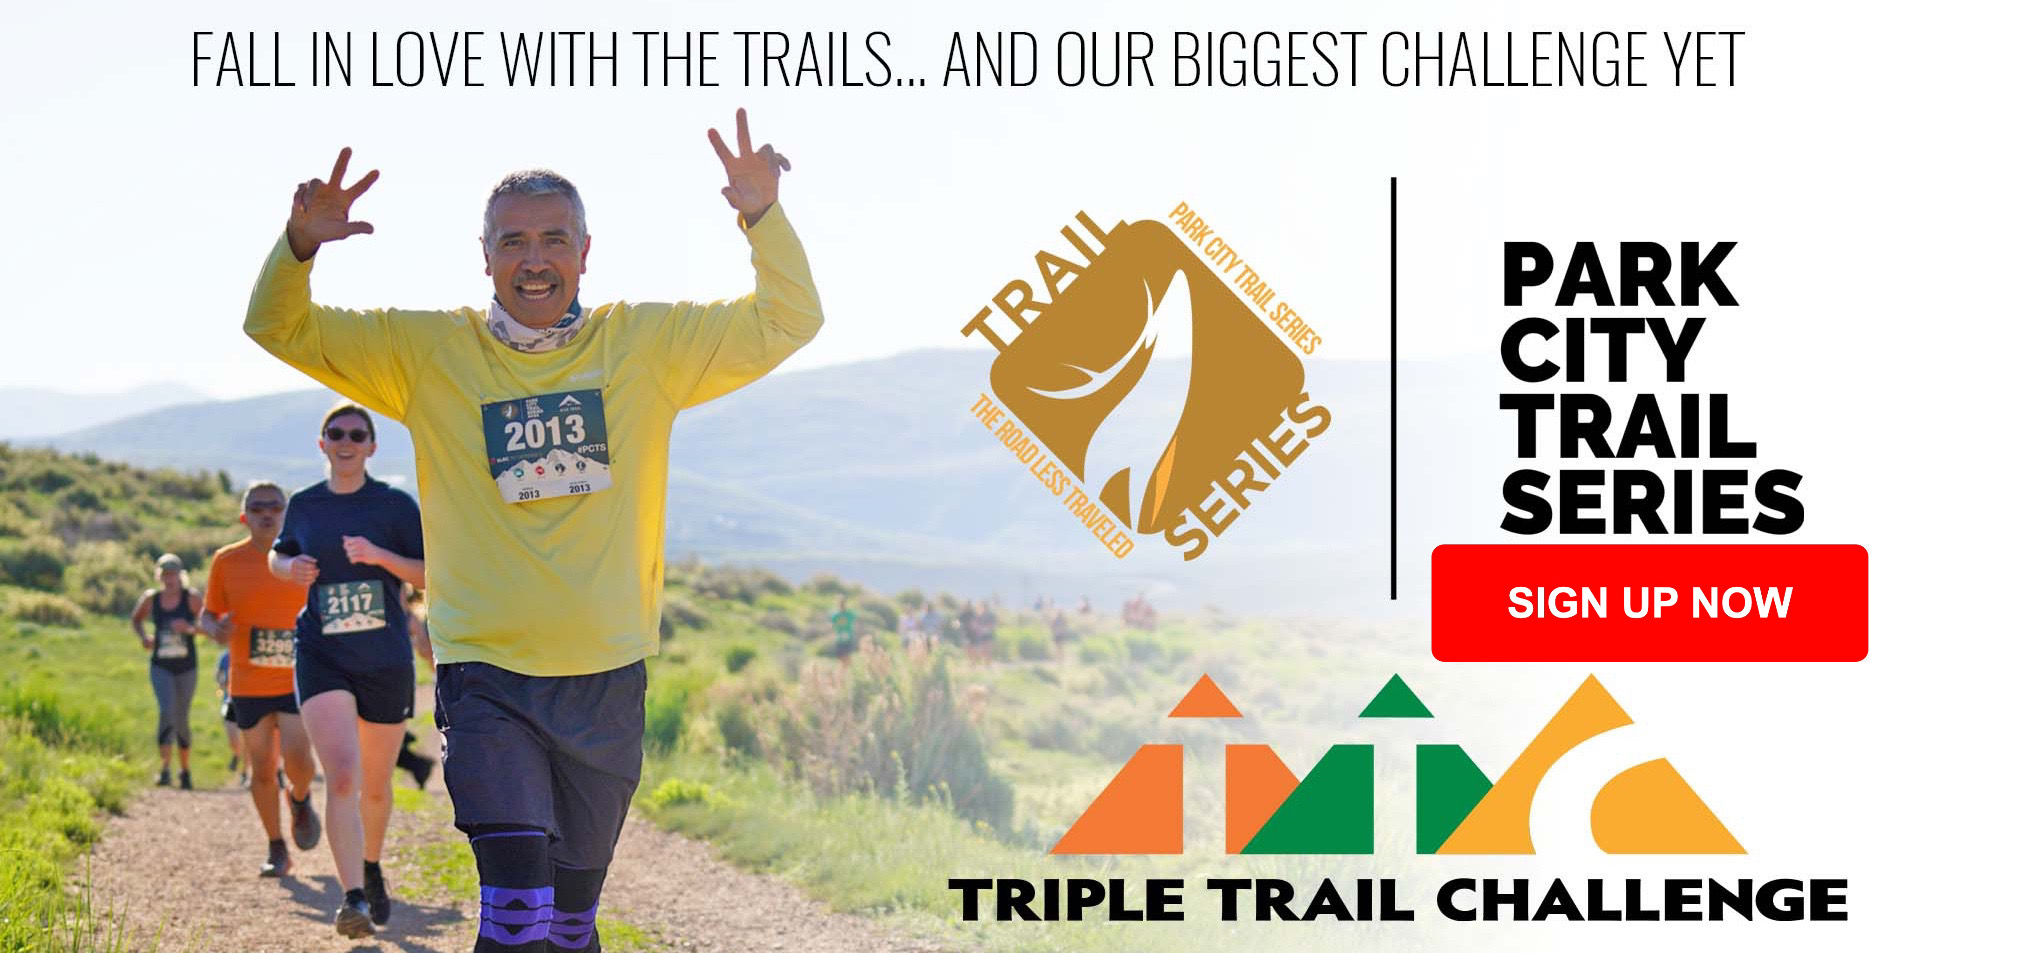 Park City Trail Series & Triple Trail Challenge: Fall in love with the trails and our biggest challenge yet!